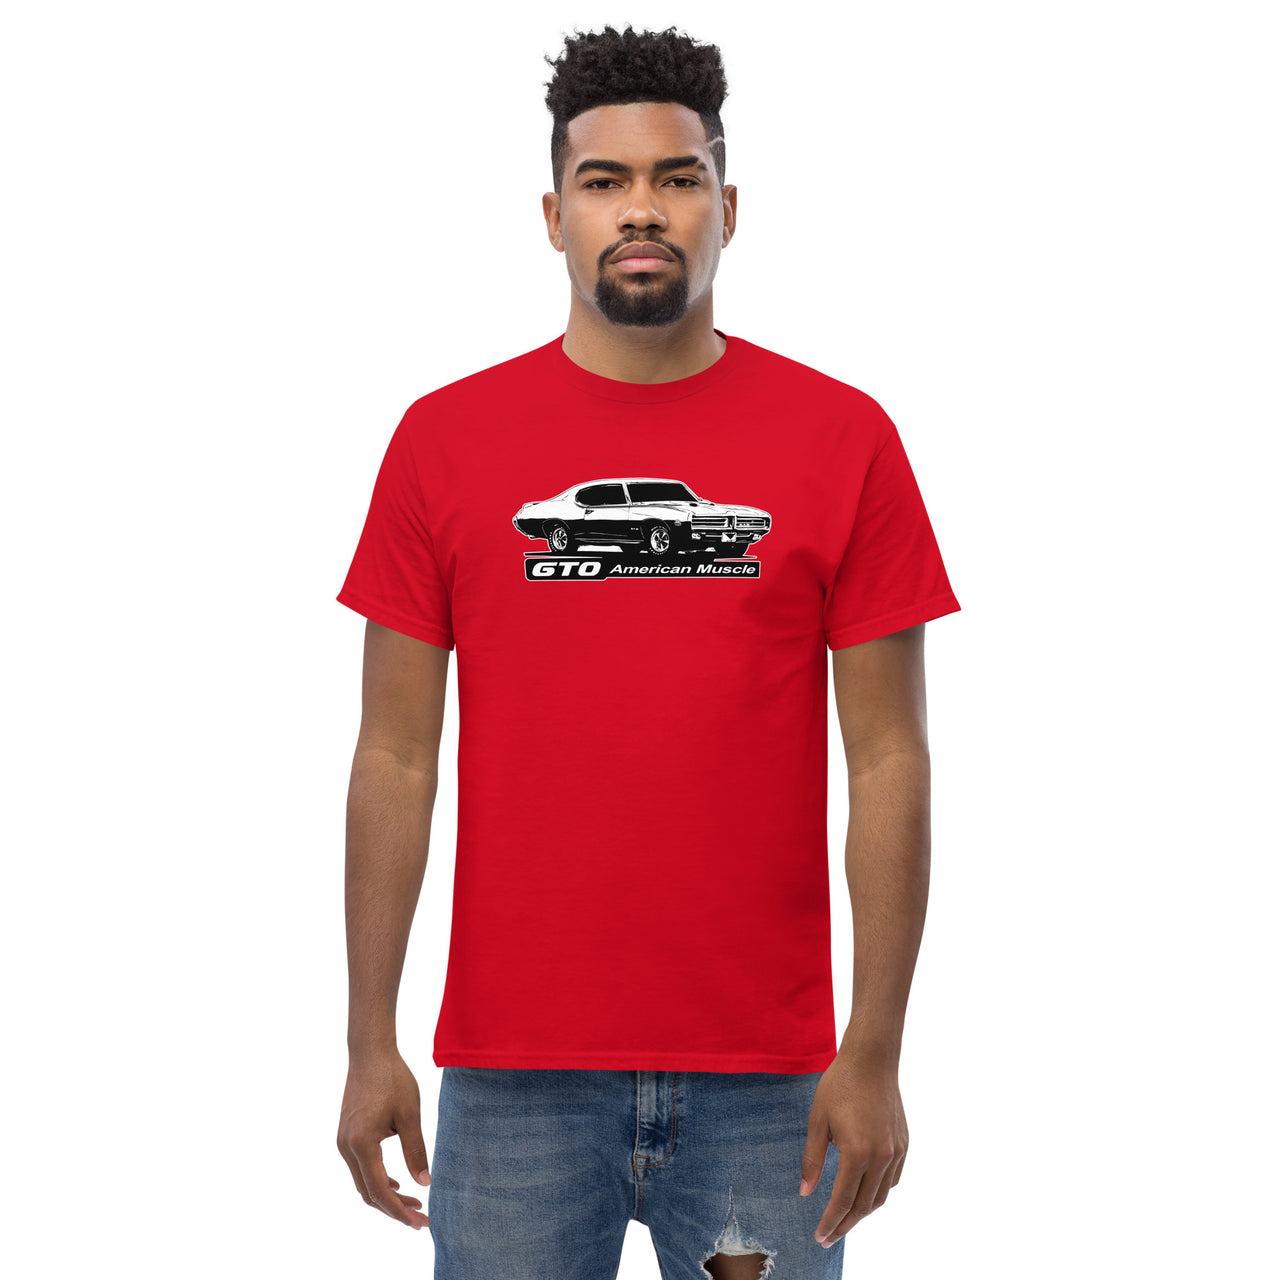 1969 GTO T-Shirt modeled in red